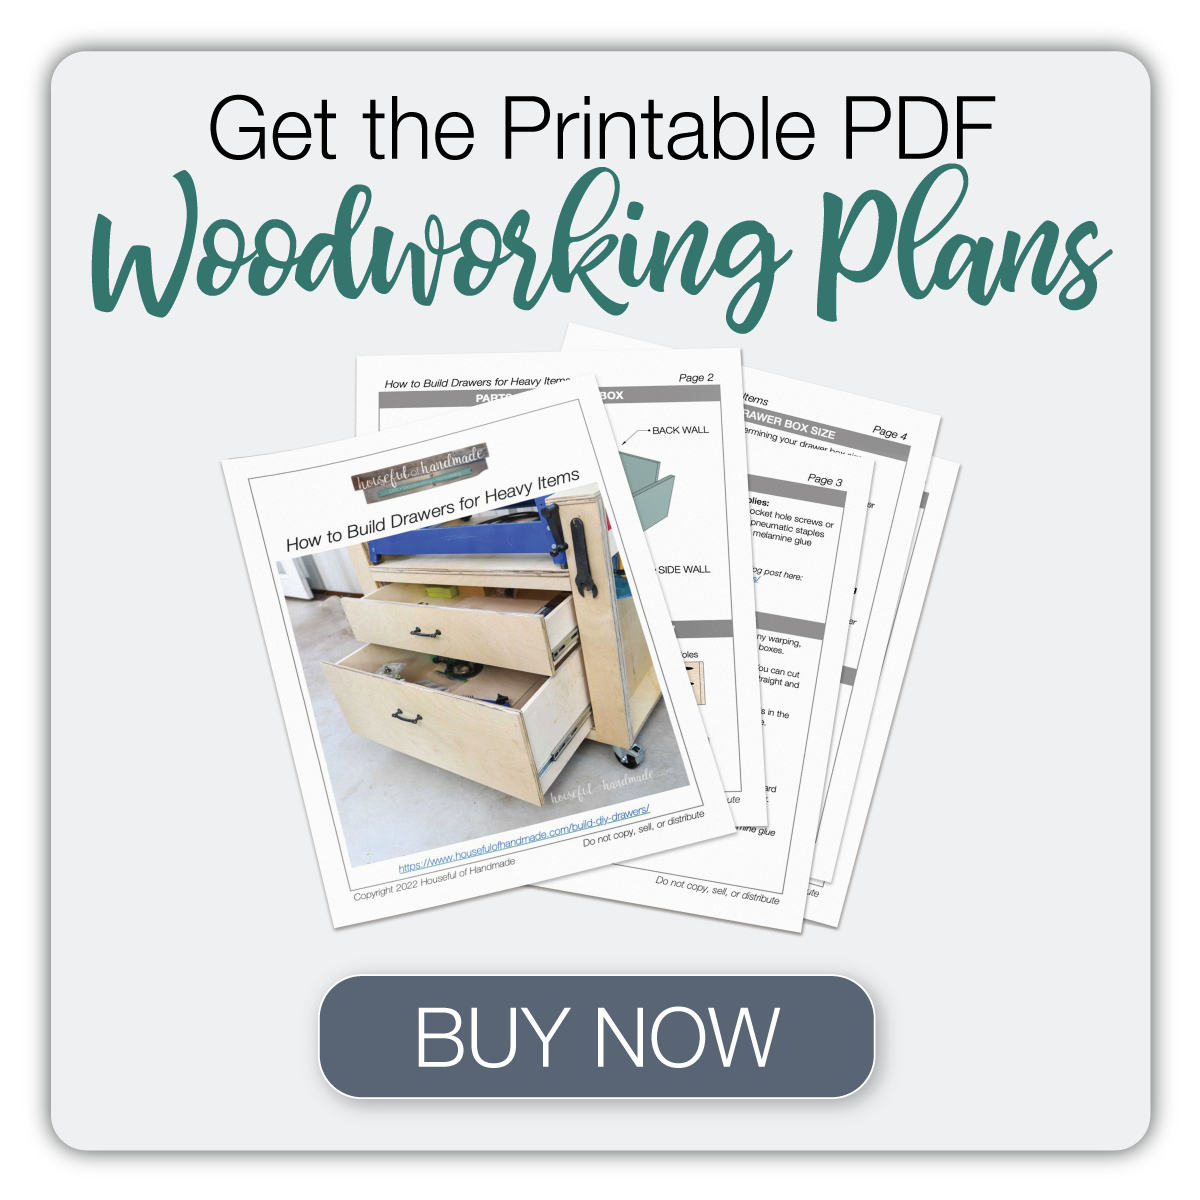 Button to buy printable PDF woodworking plans for building drawers with a heavy bottom.